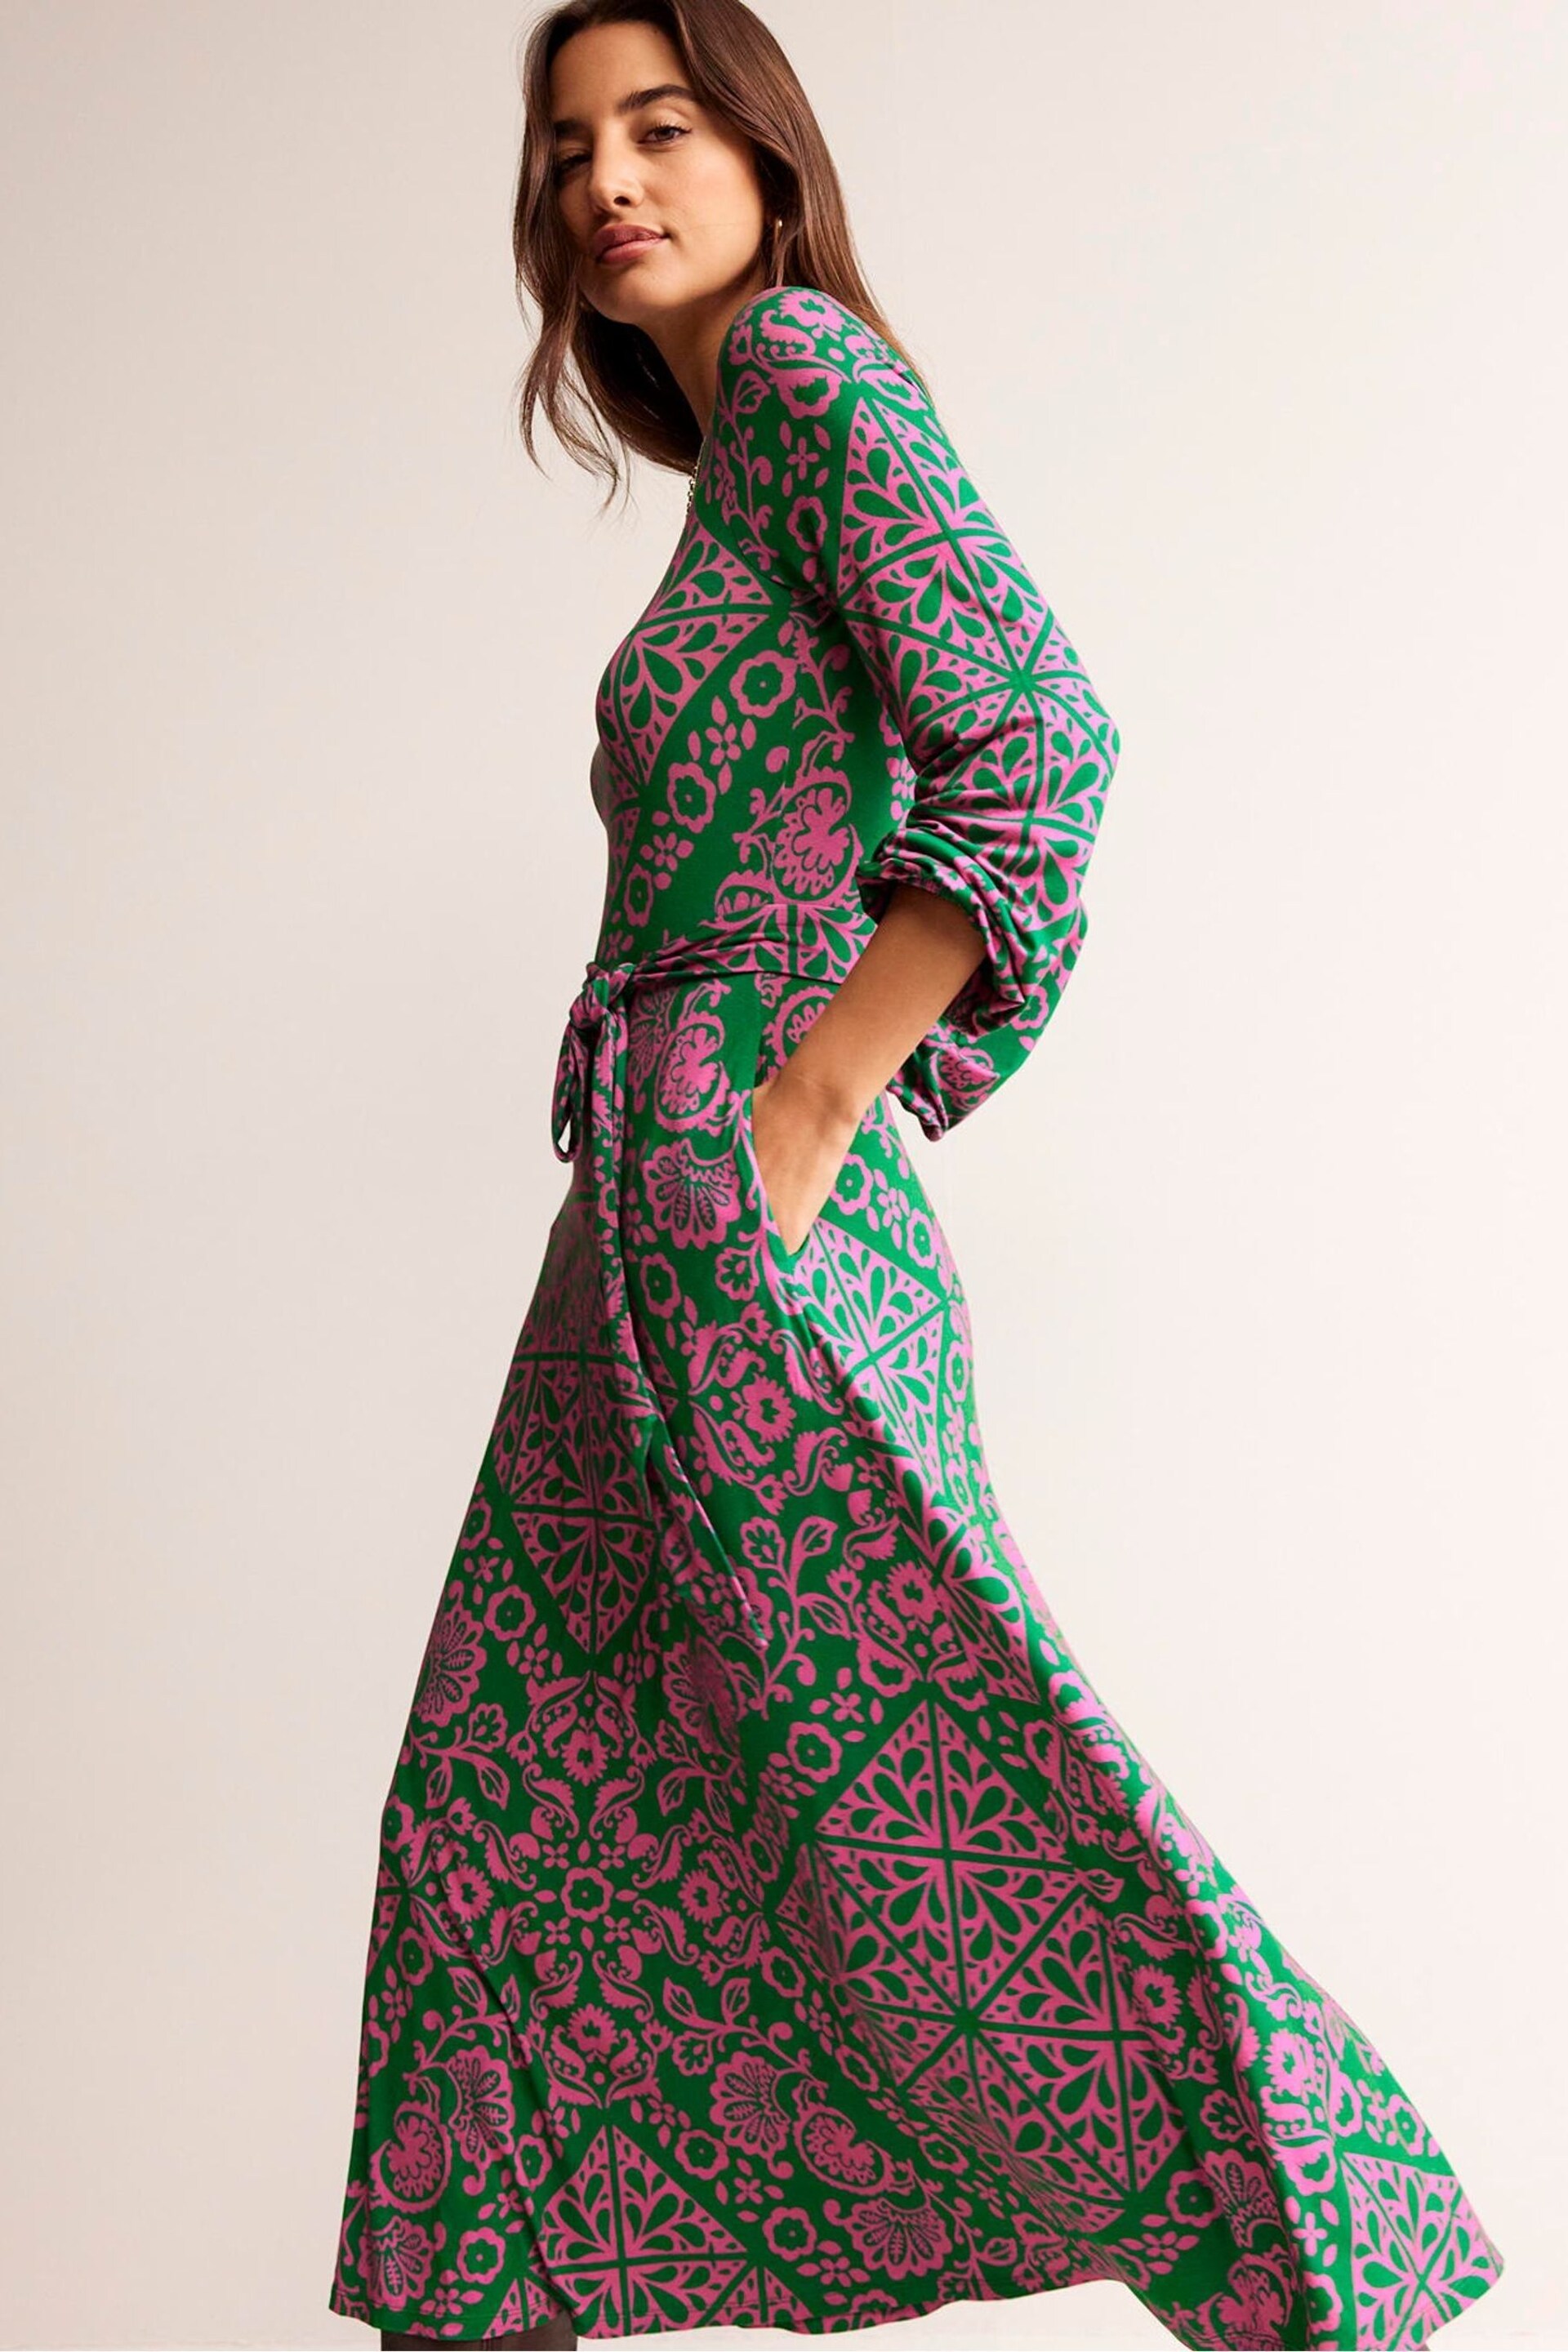 Boden Green Placement Print Jersey Dress - Image 3 of 5